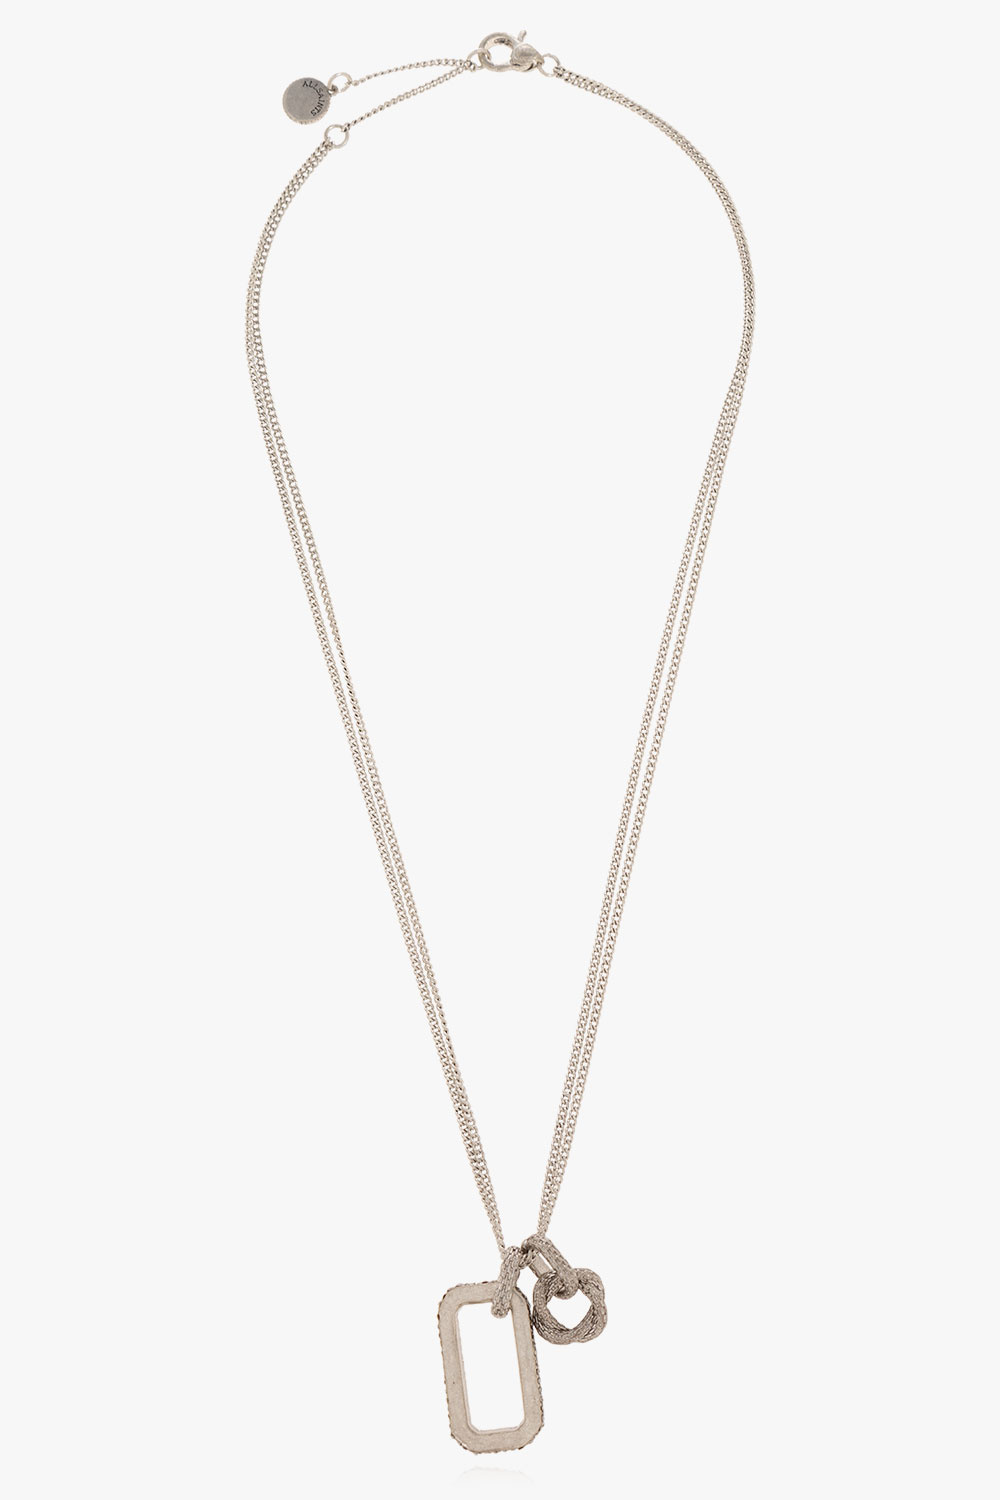 AllSaints ‘Rosey’ necklace with pendants